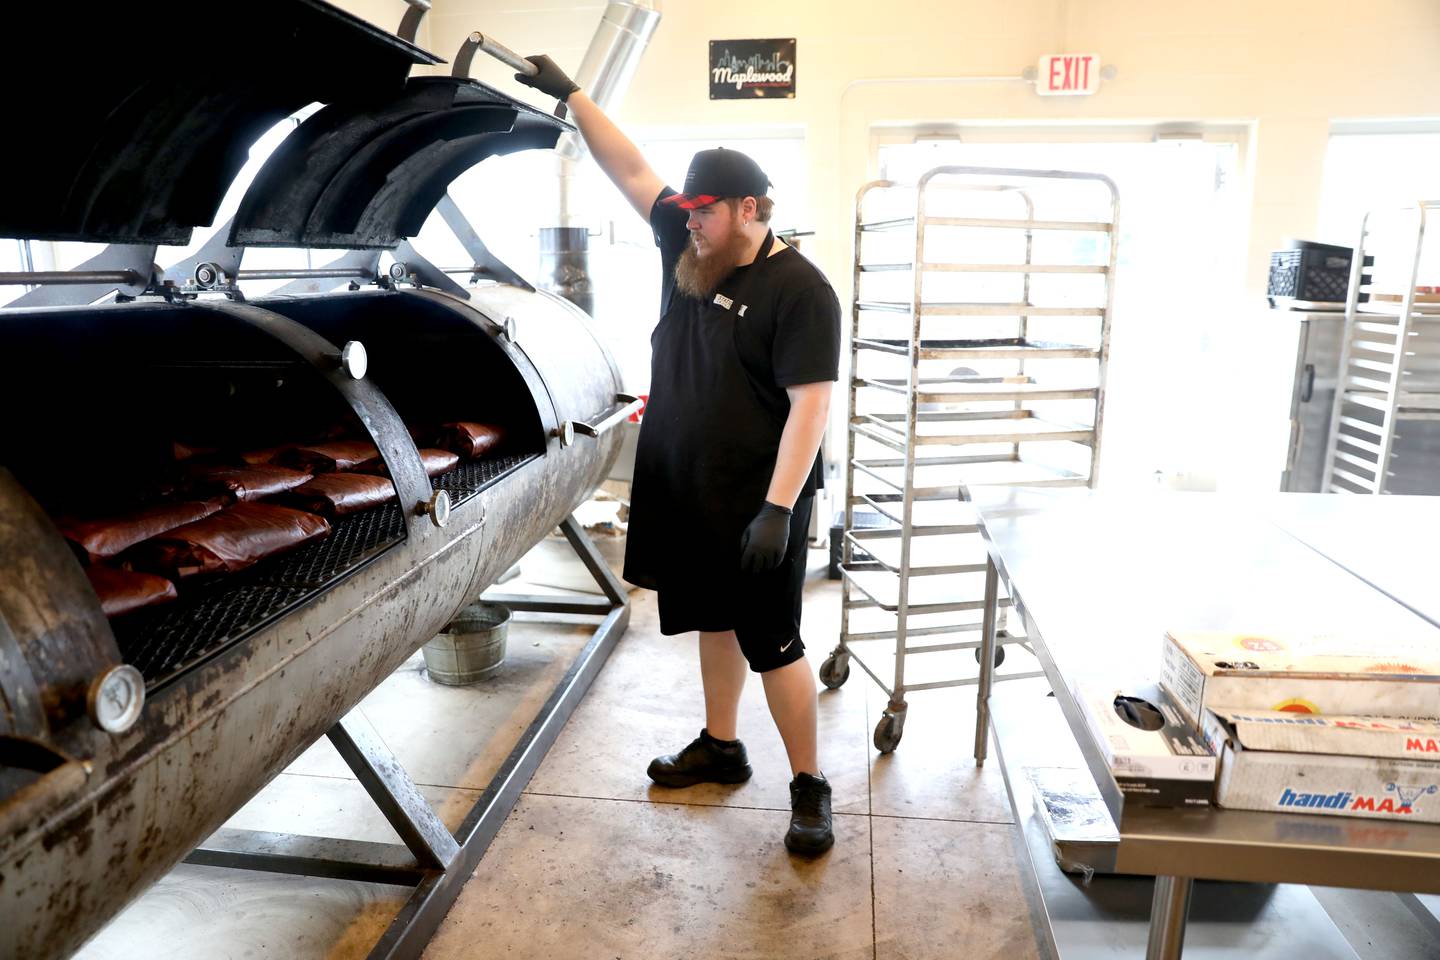 Jake Henry is the back-of-house manager at Station One Smokehouse, which recently opened at 524 E. Kendall Dr. in Yorkville.